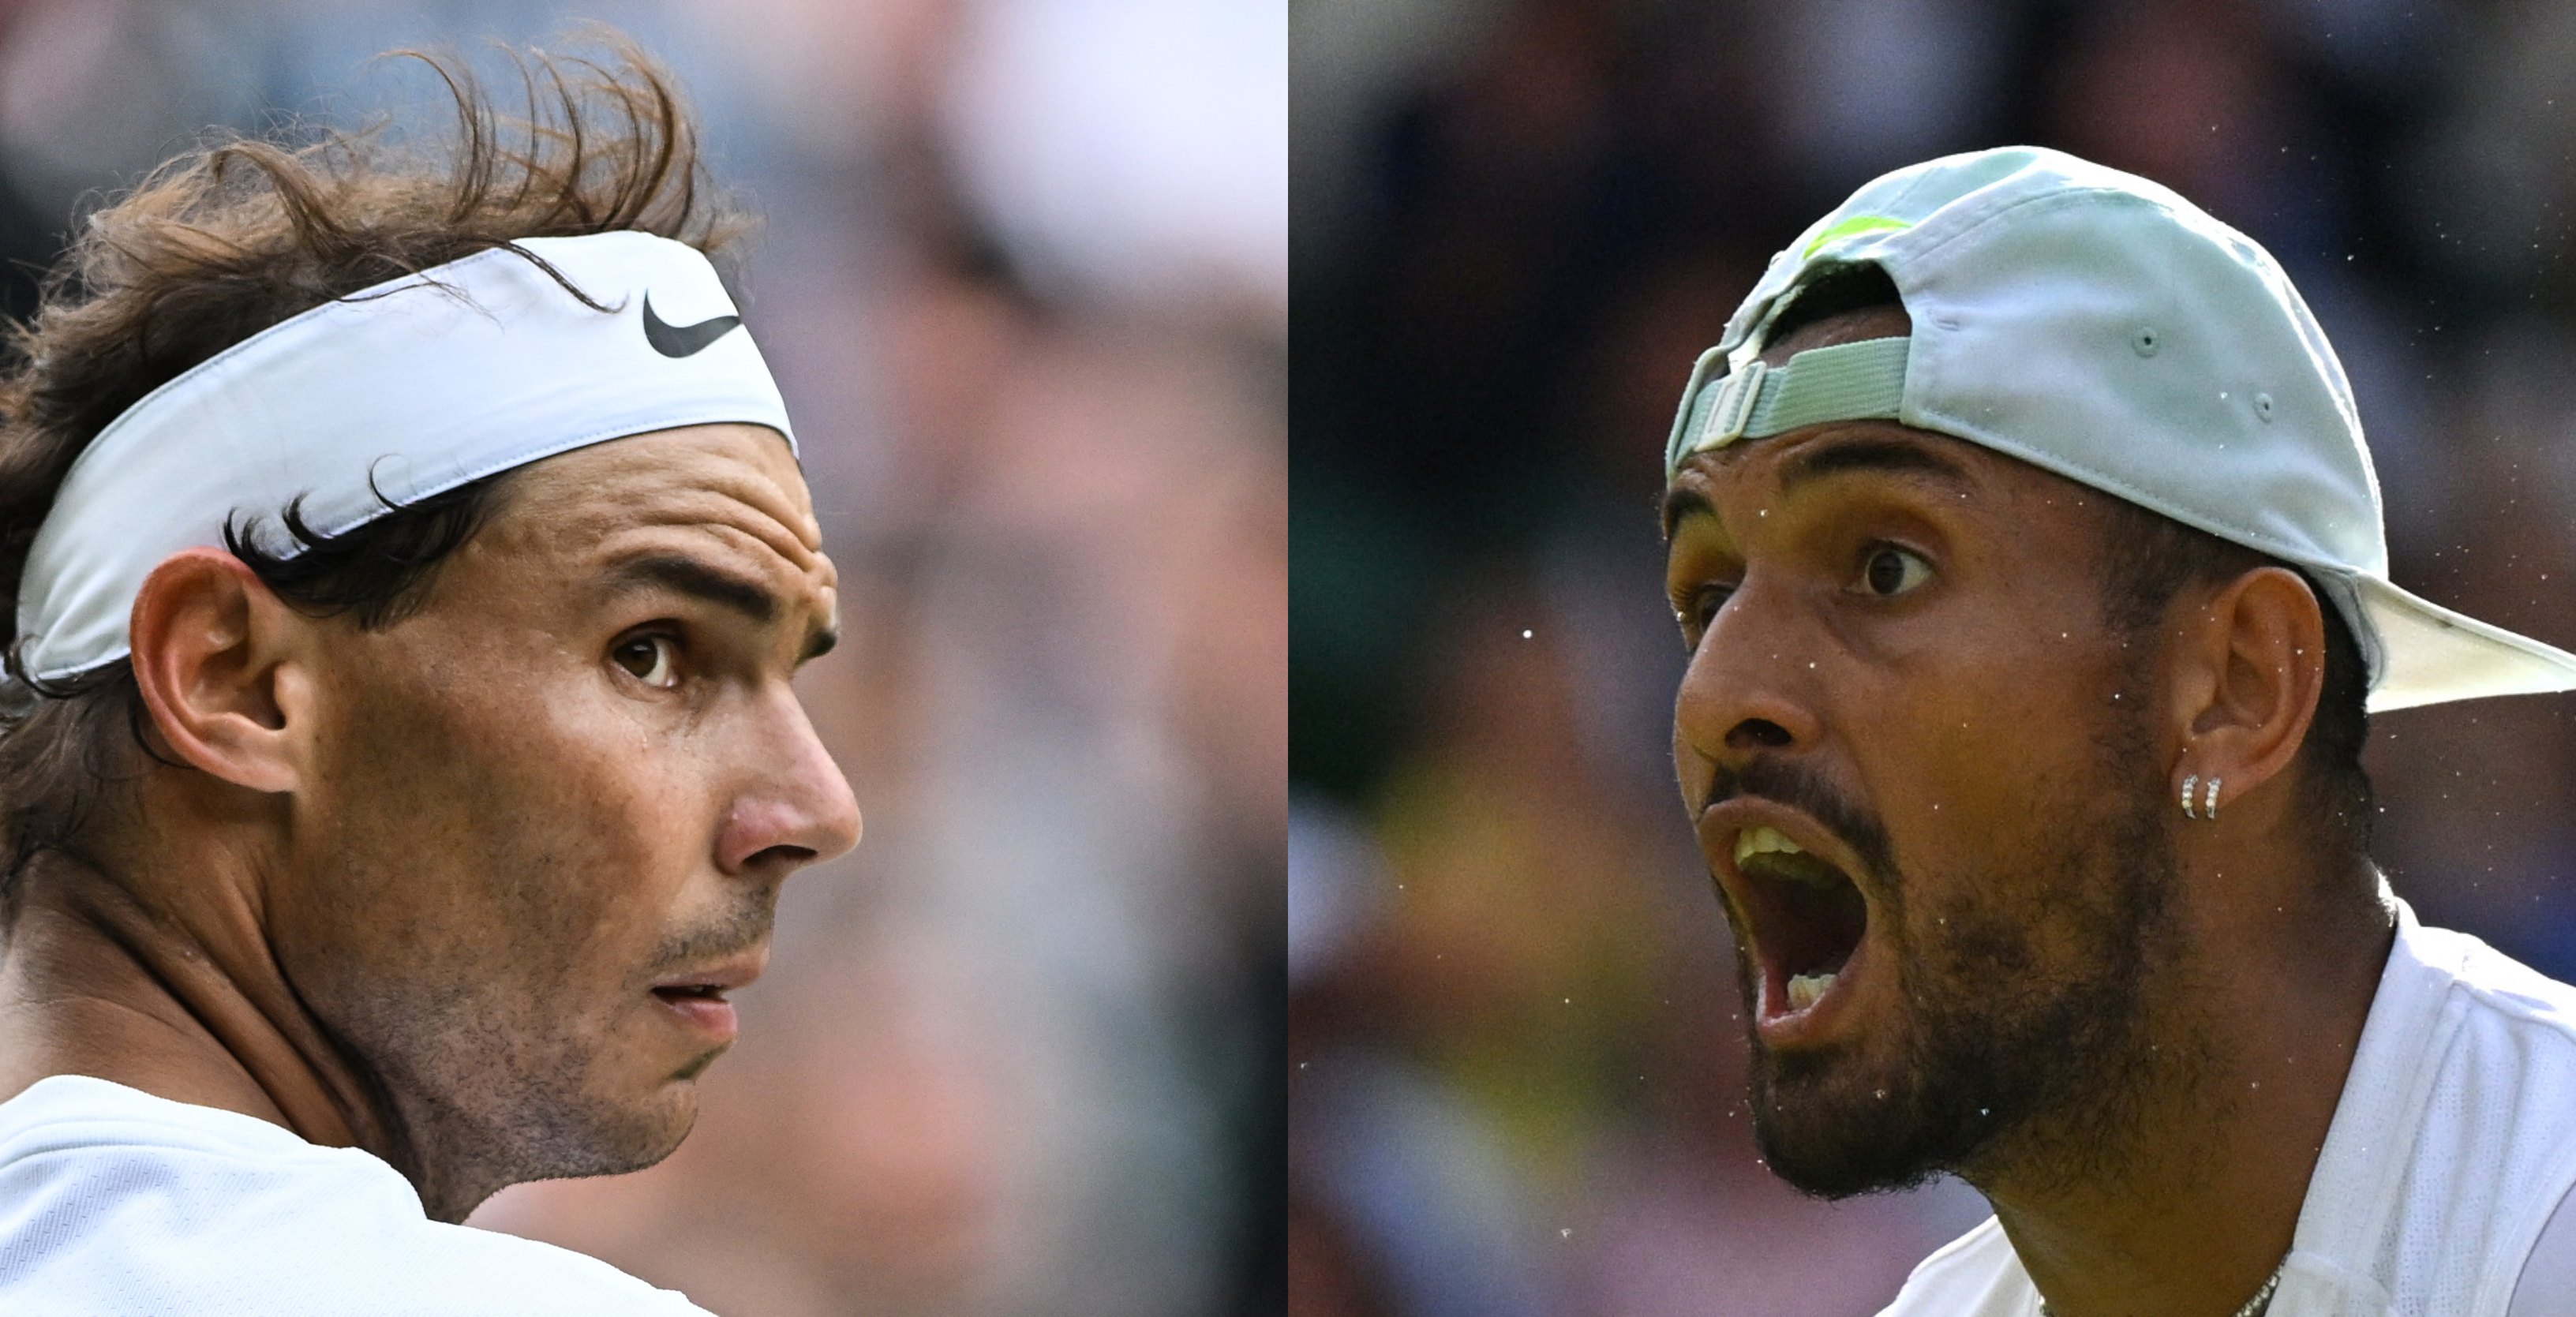 Kyrgios at Wimbledon: when and how to watch the semifinals on television and the internet